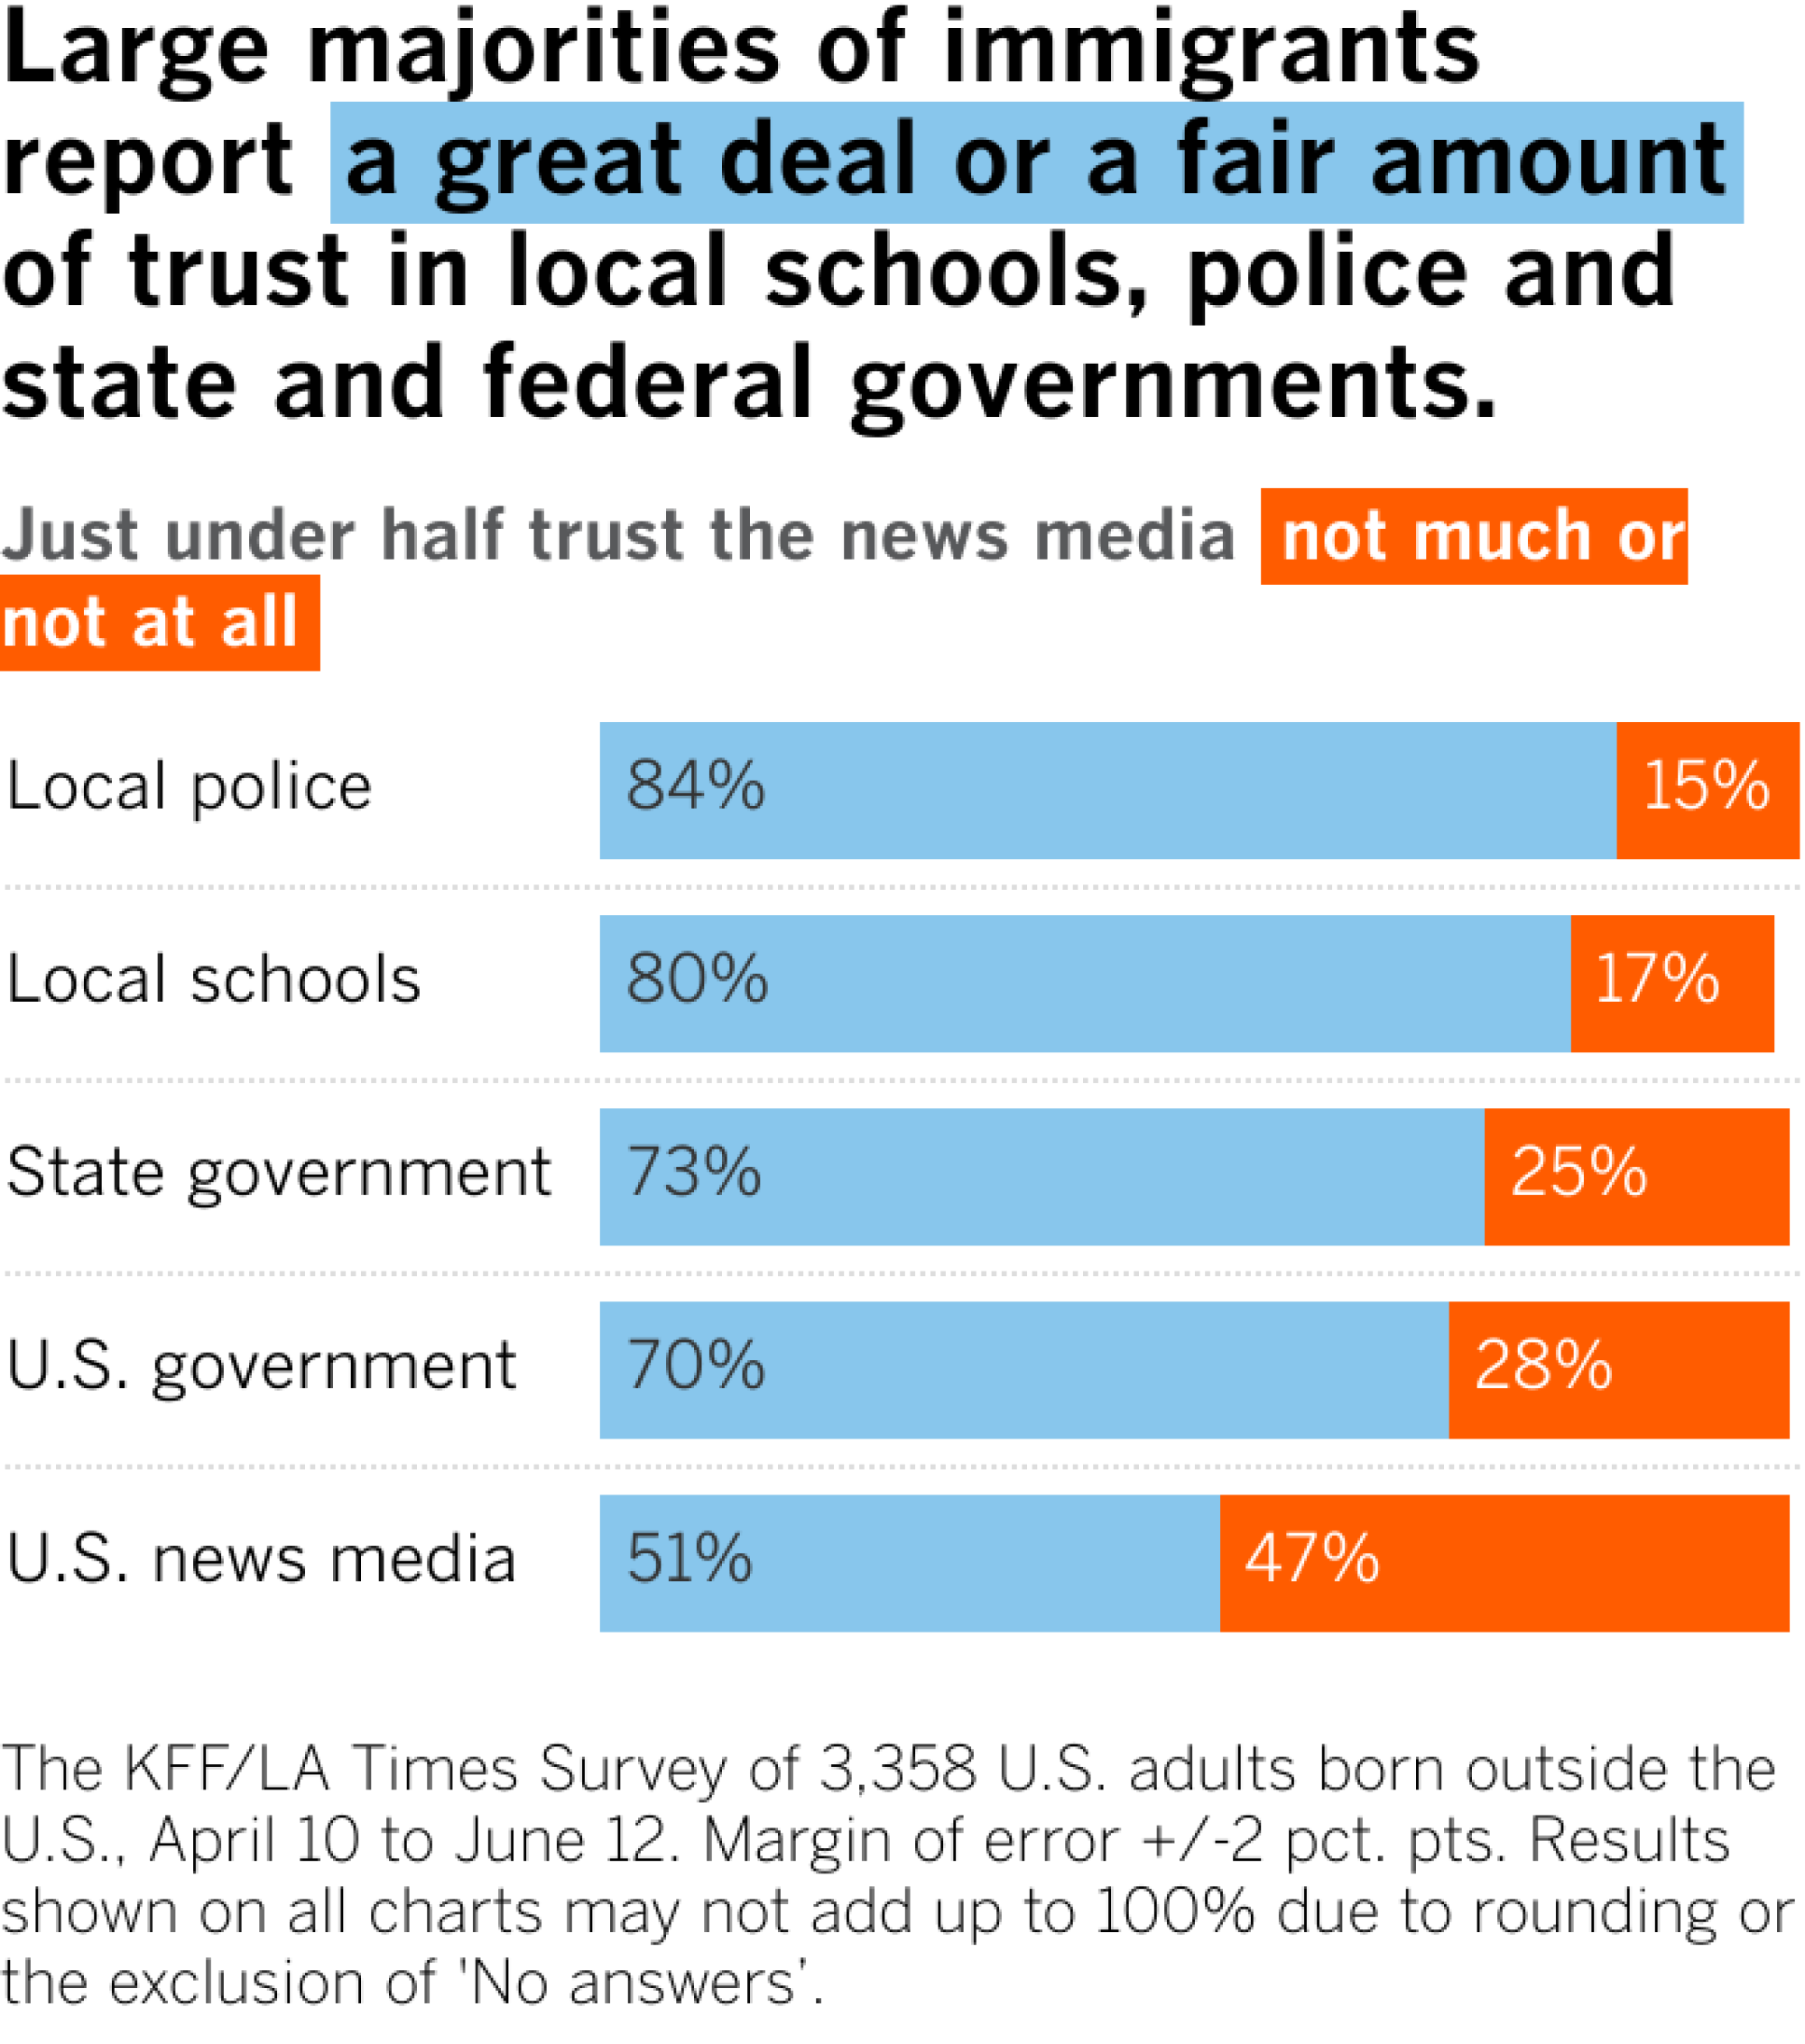 Bar chart showing trust in local police, local schools, state government, U.S. government and U.S. news media